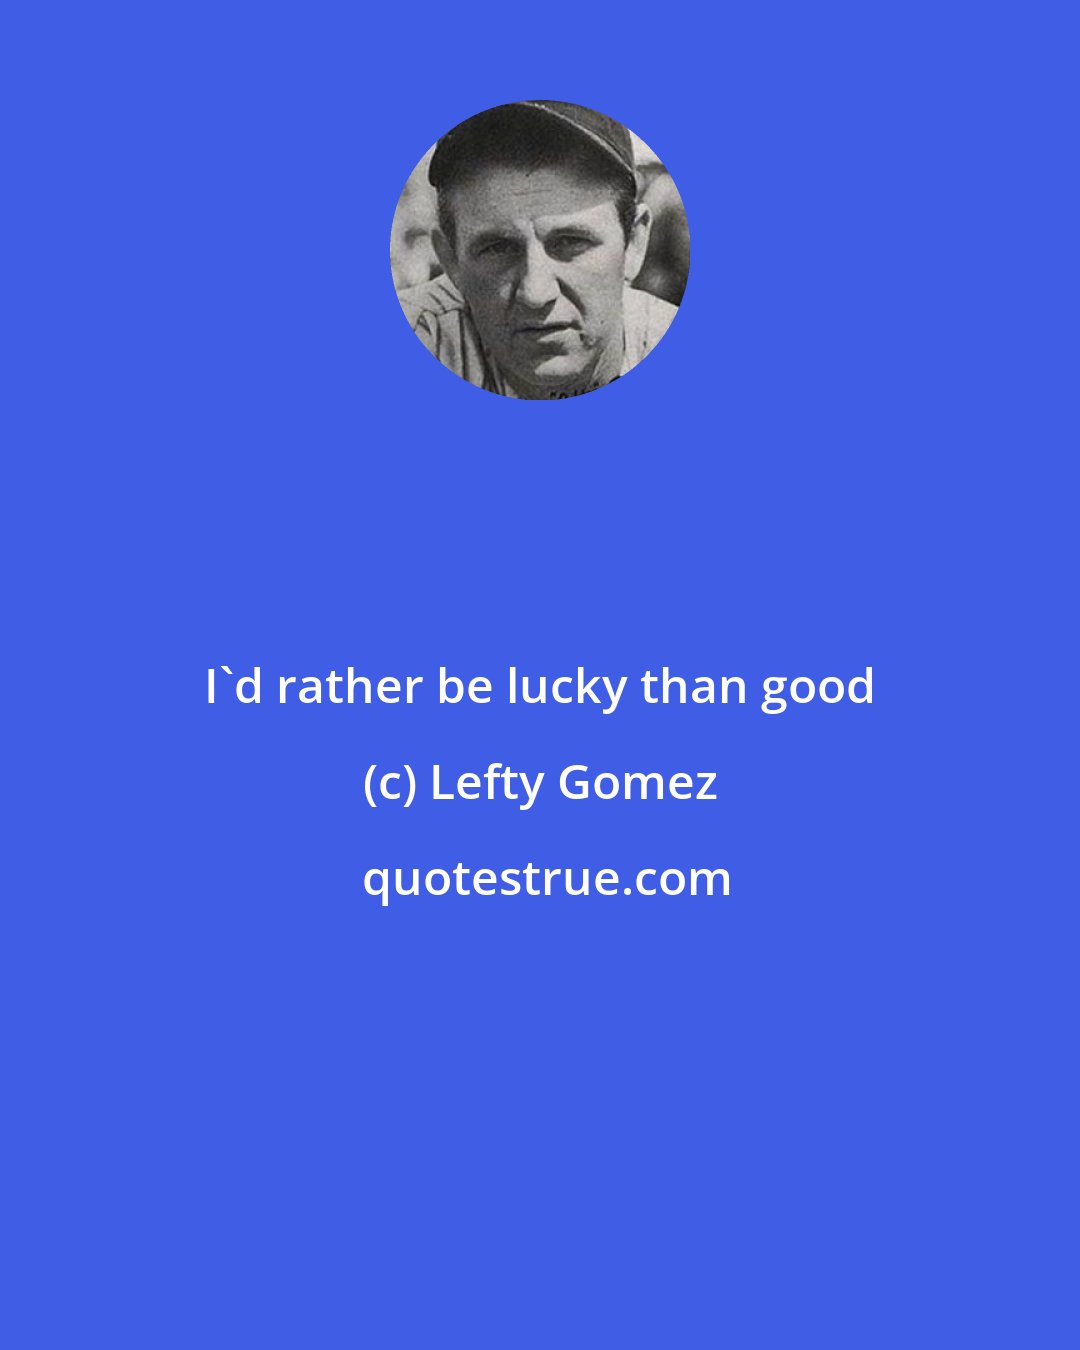 Lefty Gomez: I'd rather be lucky than good